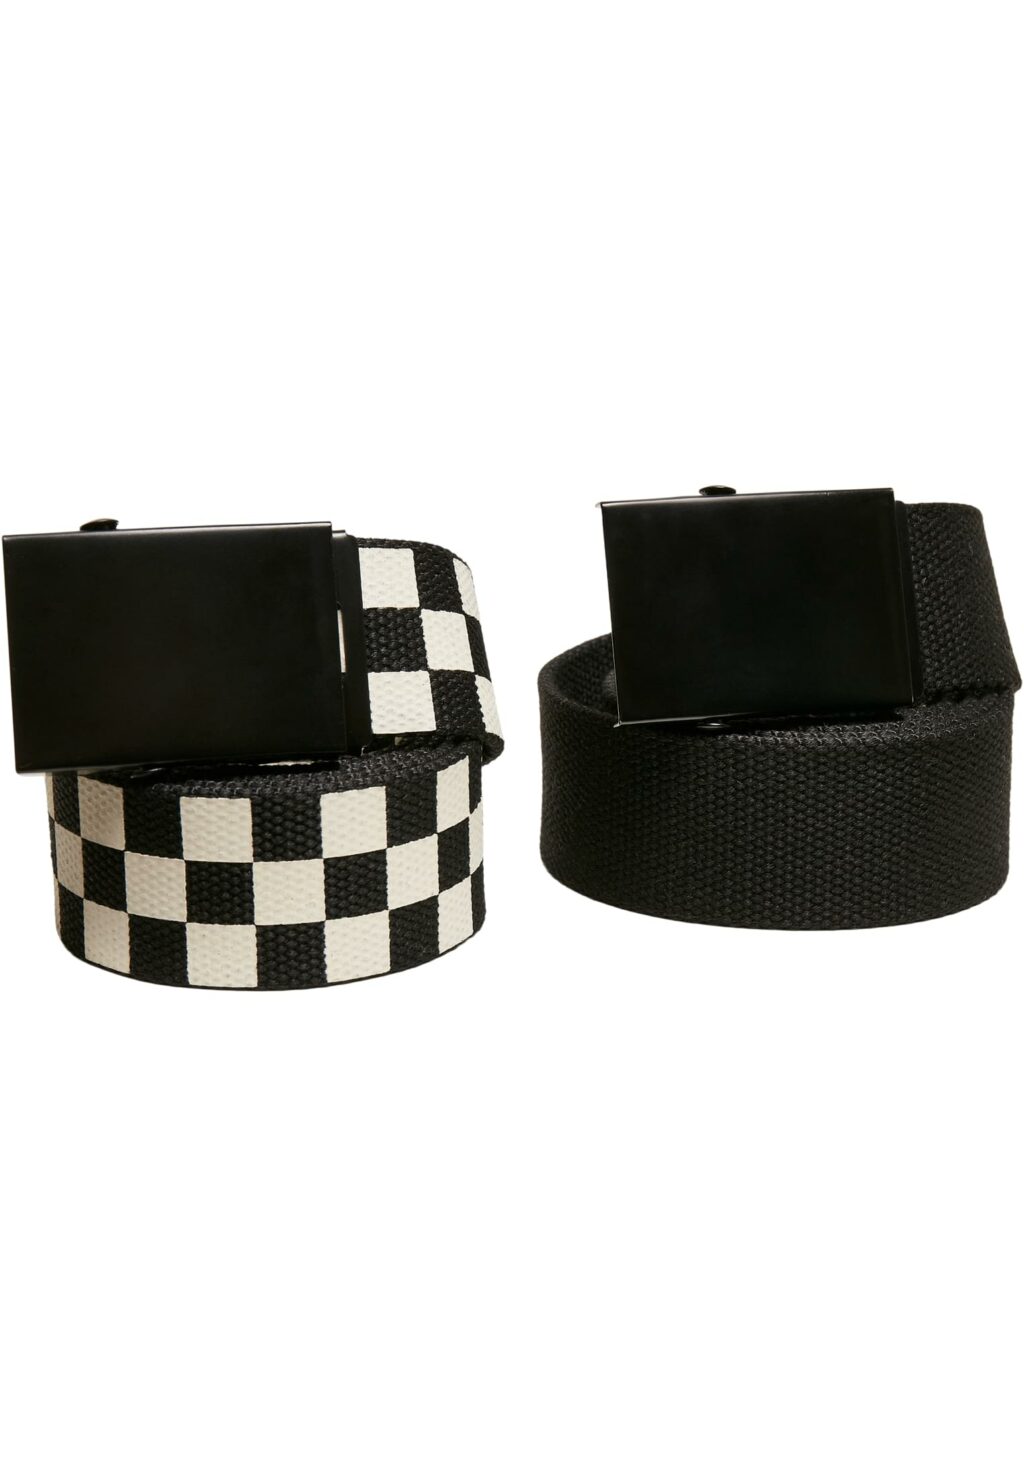 Check And Solid Canvas Belt 2-Pack black/offwhite TB5139